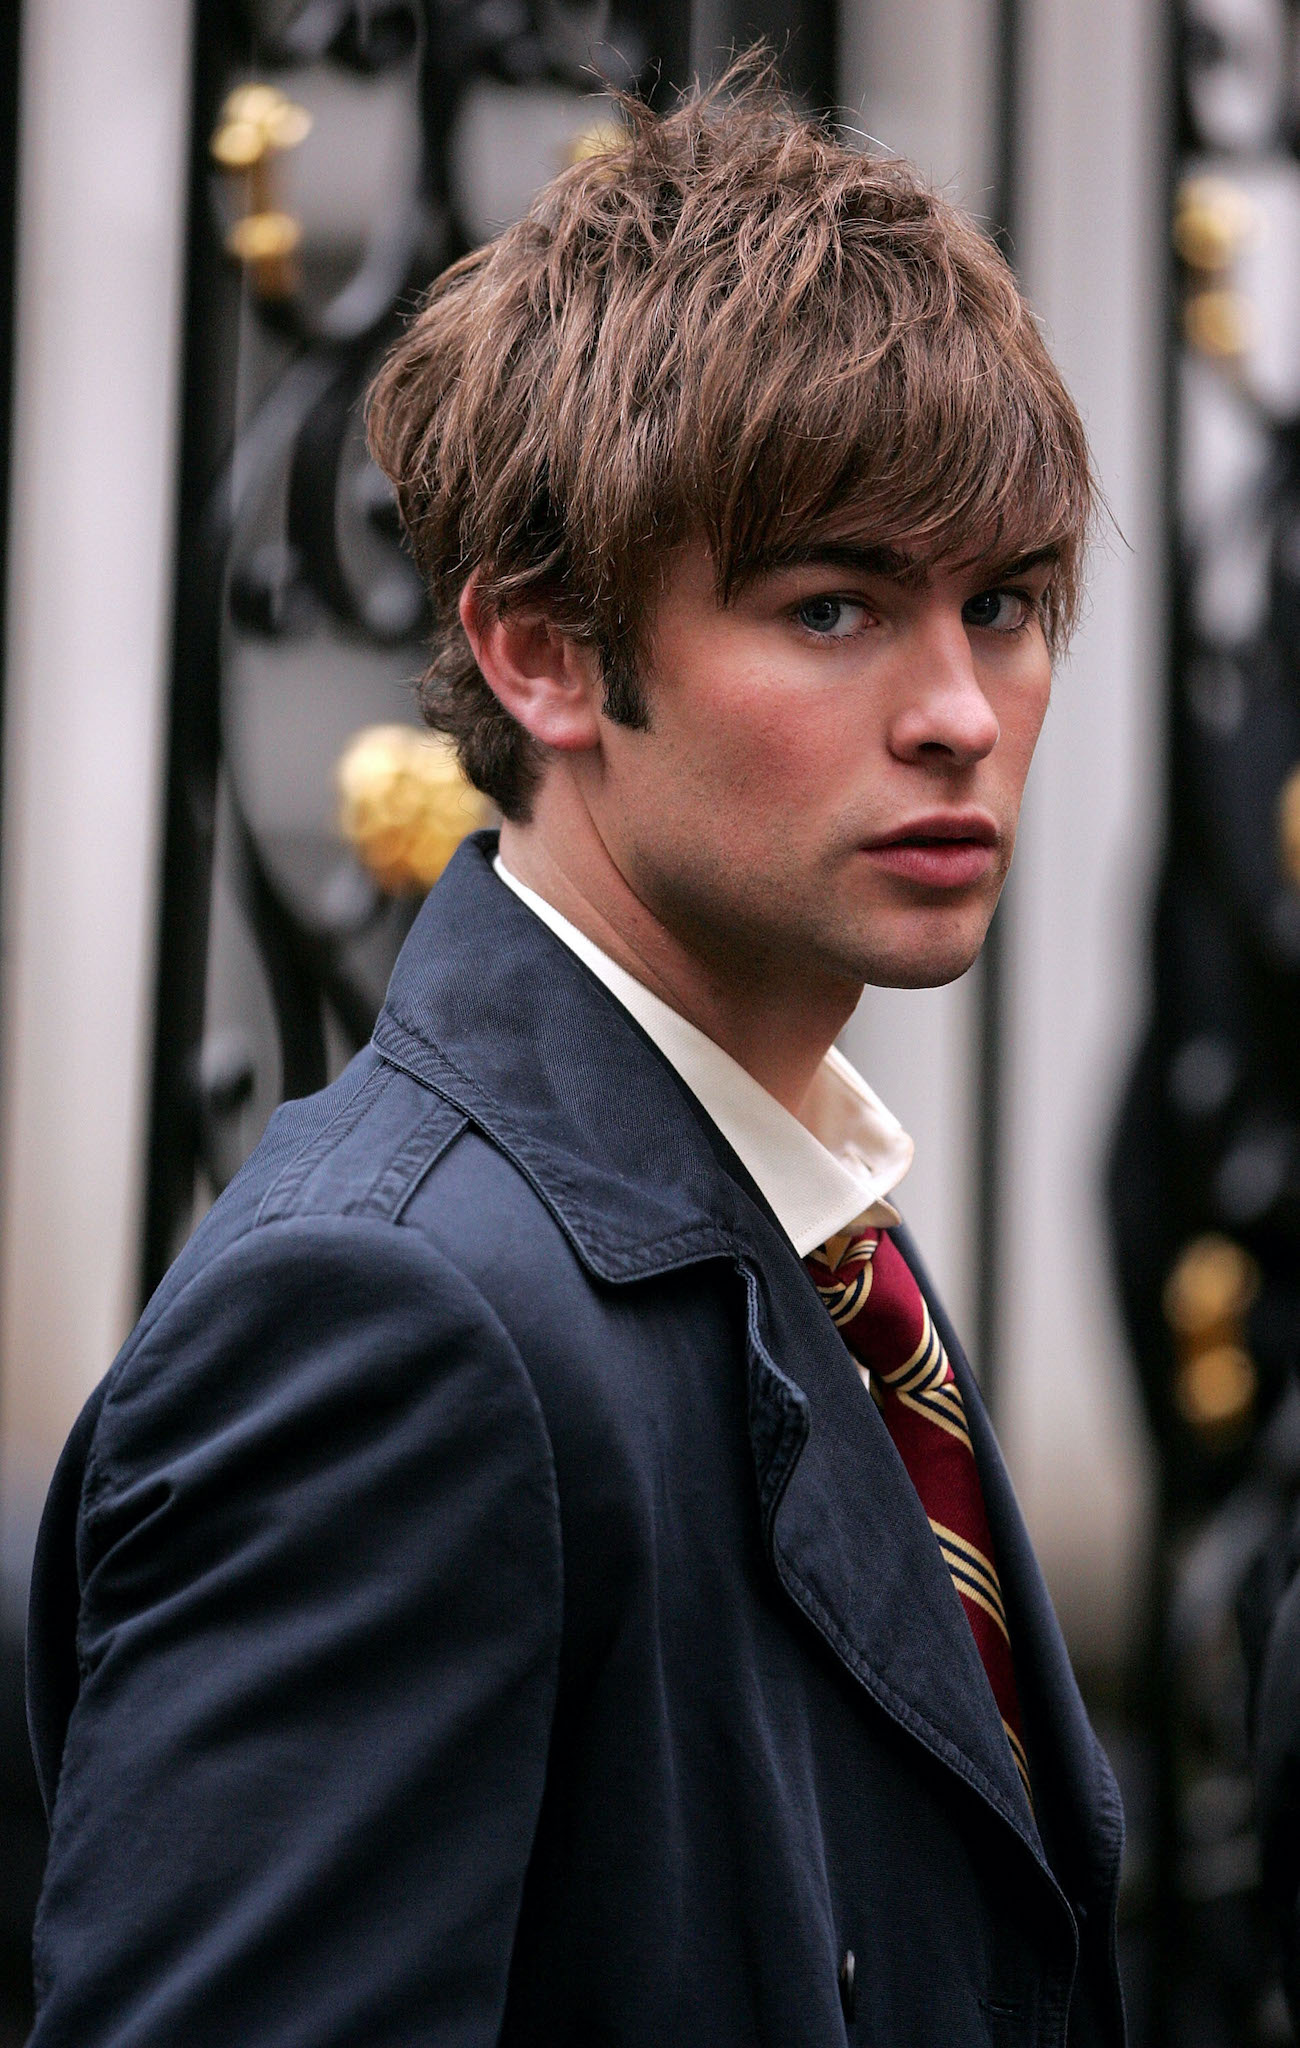 Chace Crawford: Nate Archibald, The elite St. Jude's School for Boys, Gossip Girl TV series. 1300x2050 HD Background.